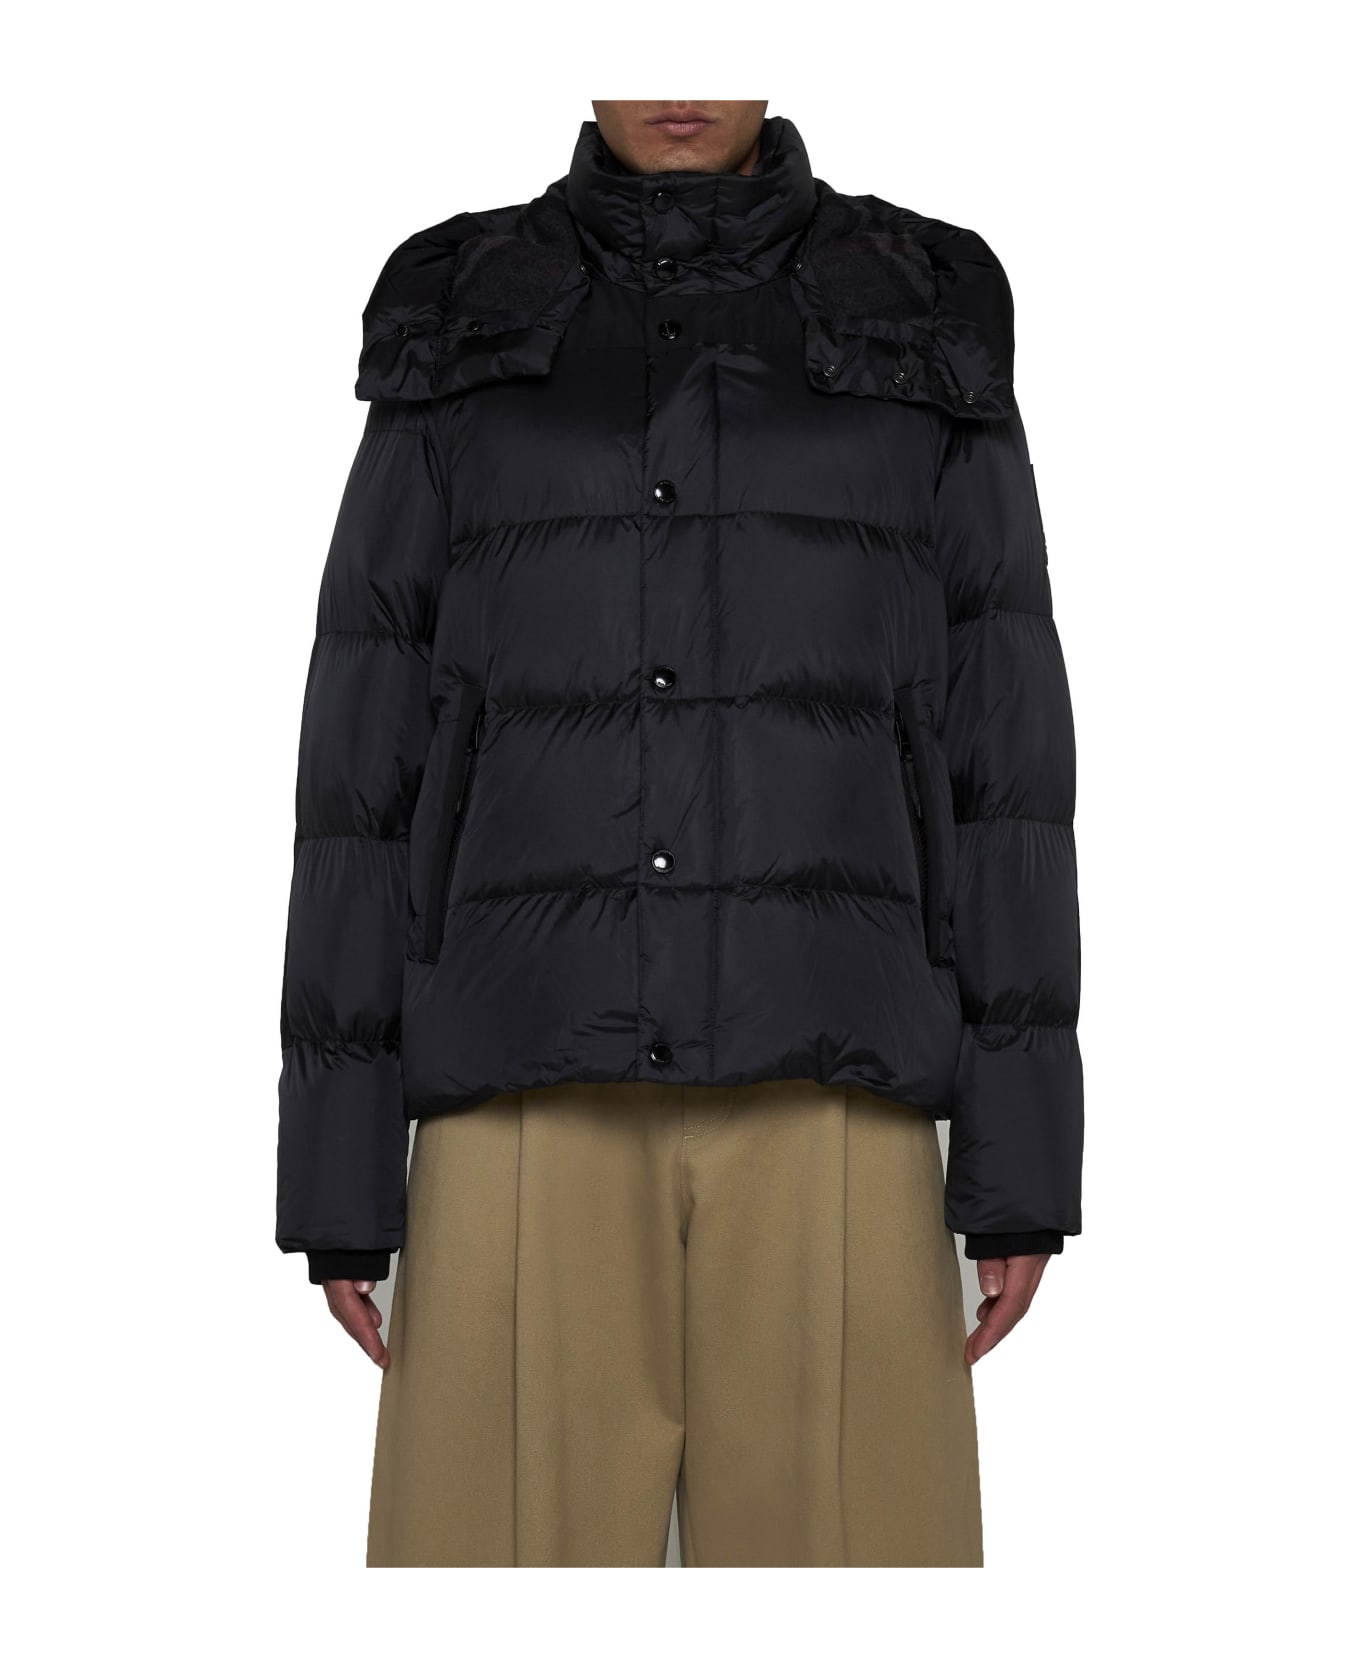 Burberry Logo Patch Hooded Coat - Black